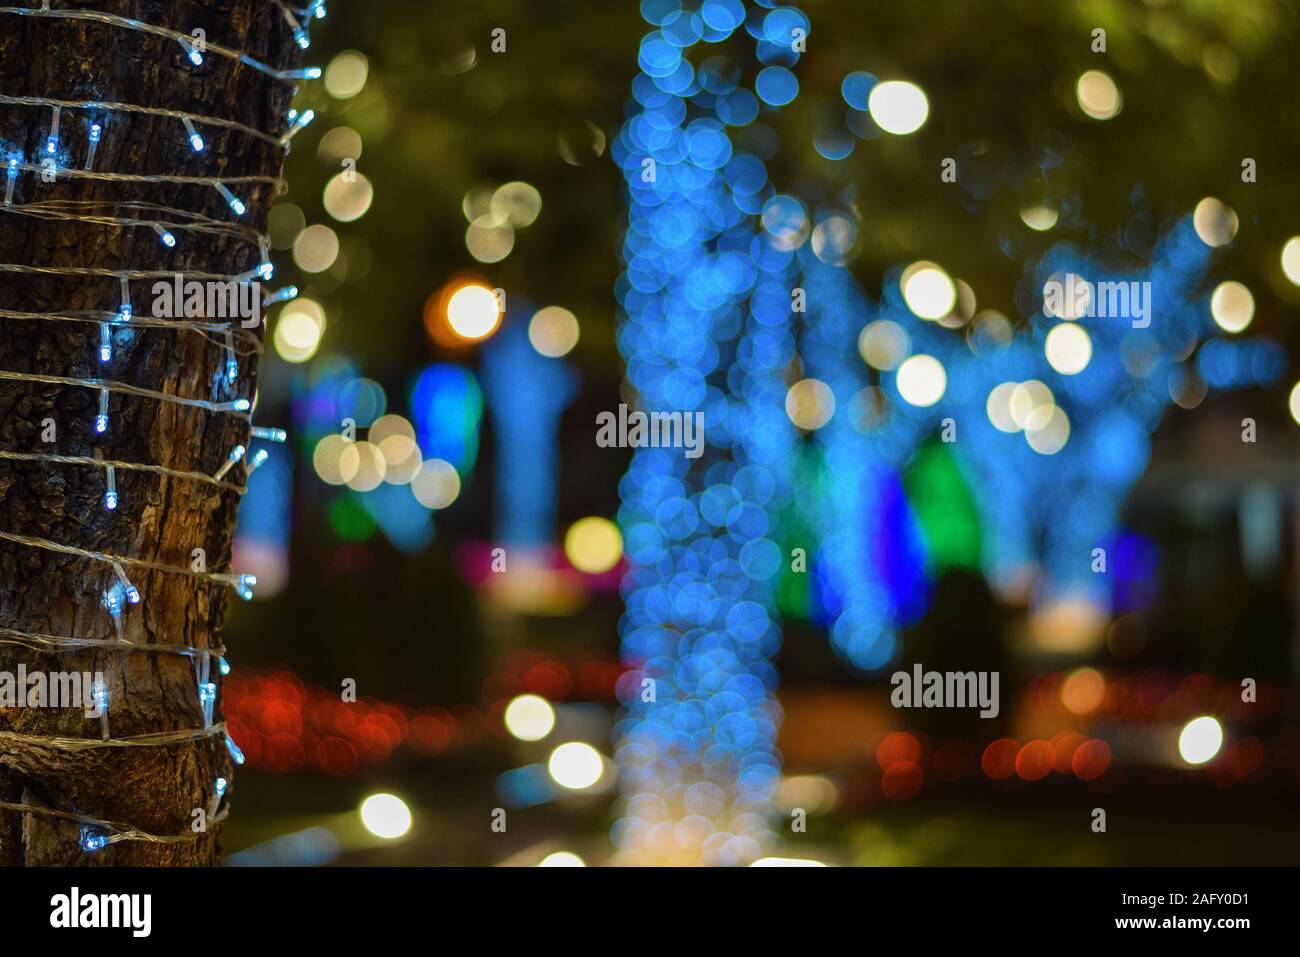 Light decorative outdoor hanging string lights hanging on tree in the garden at night time festivals season Stock Photo